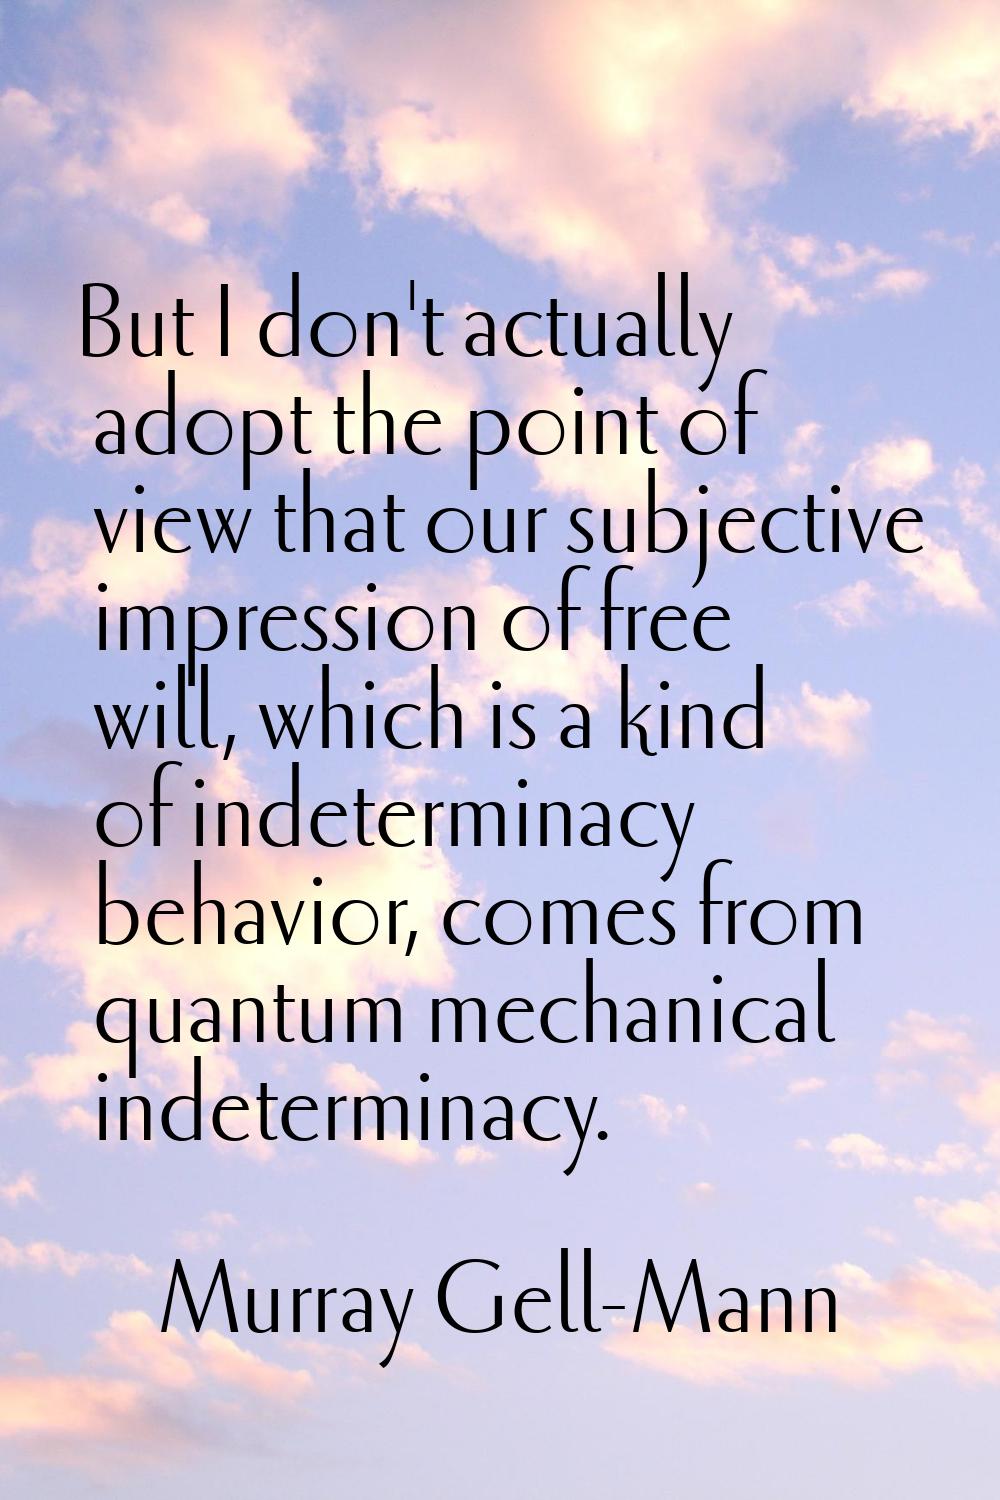 But I don't actually adopt the point of view that our subjective impression of free will, which is 